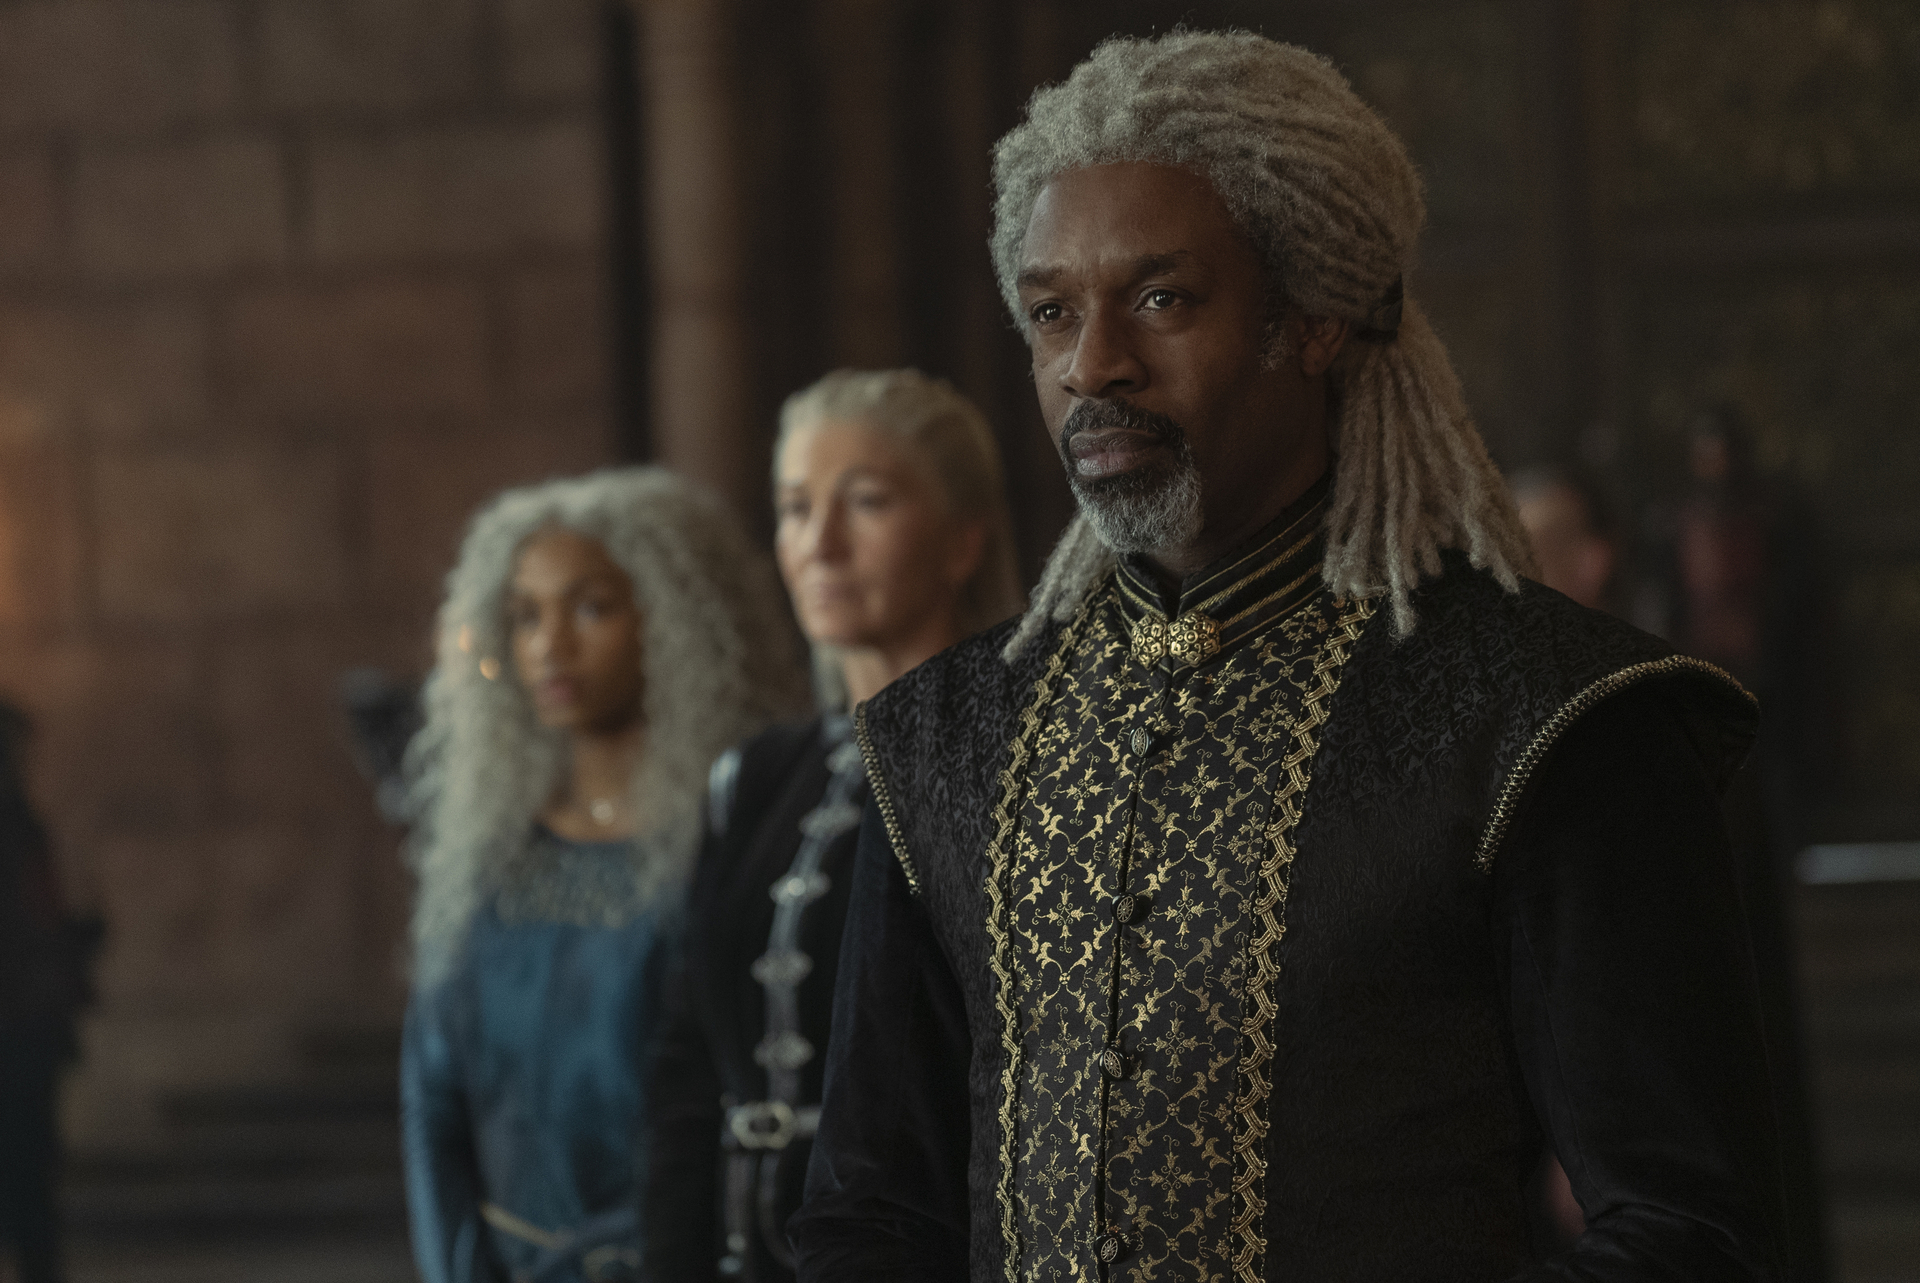 House of the Dragon review: 7 learnings from Game of Thrones prequel